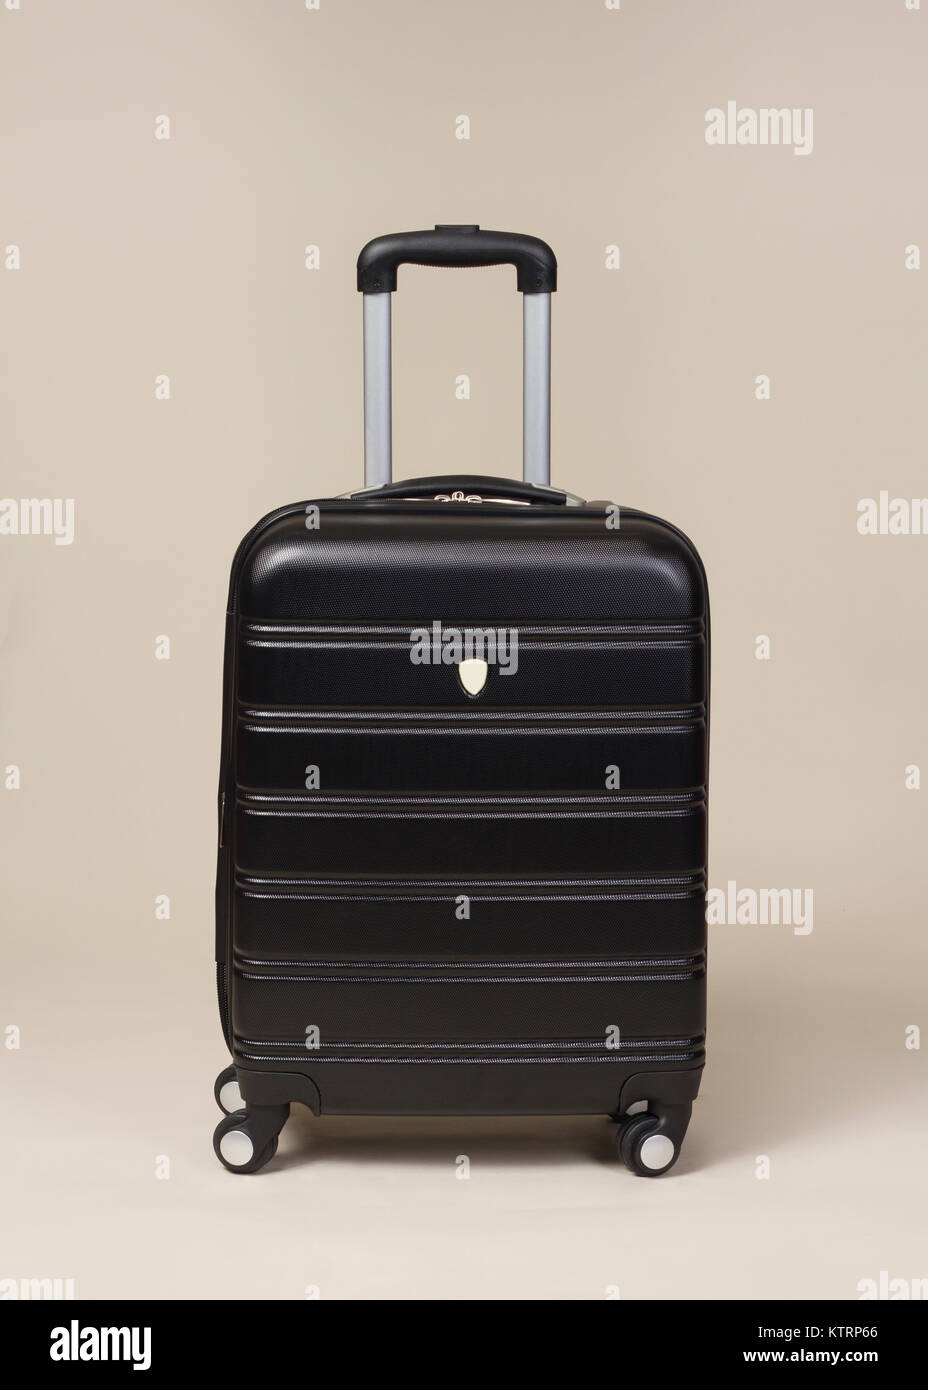 Small Black trolley suitcase bag isolated on beige background Stock Photo